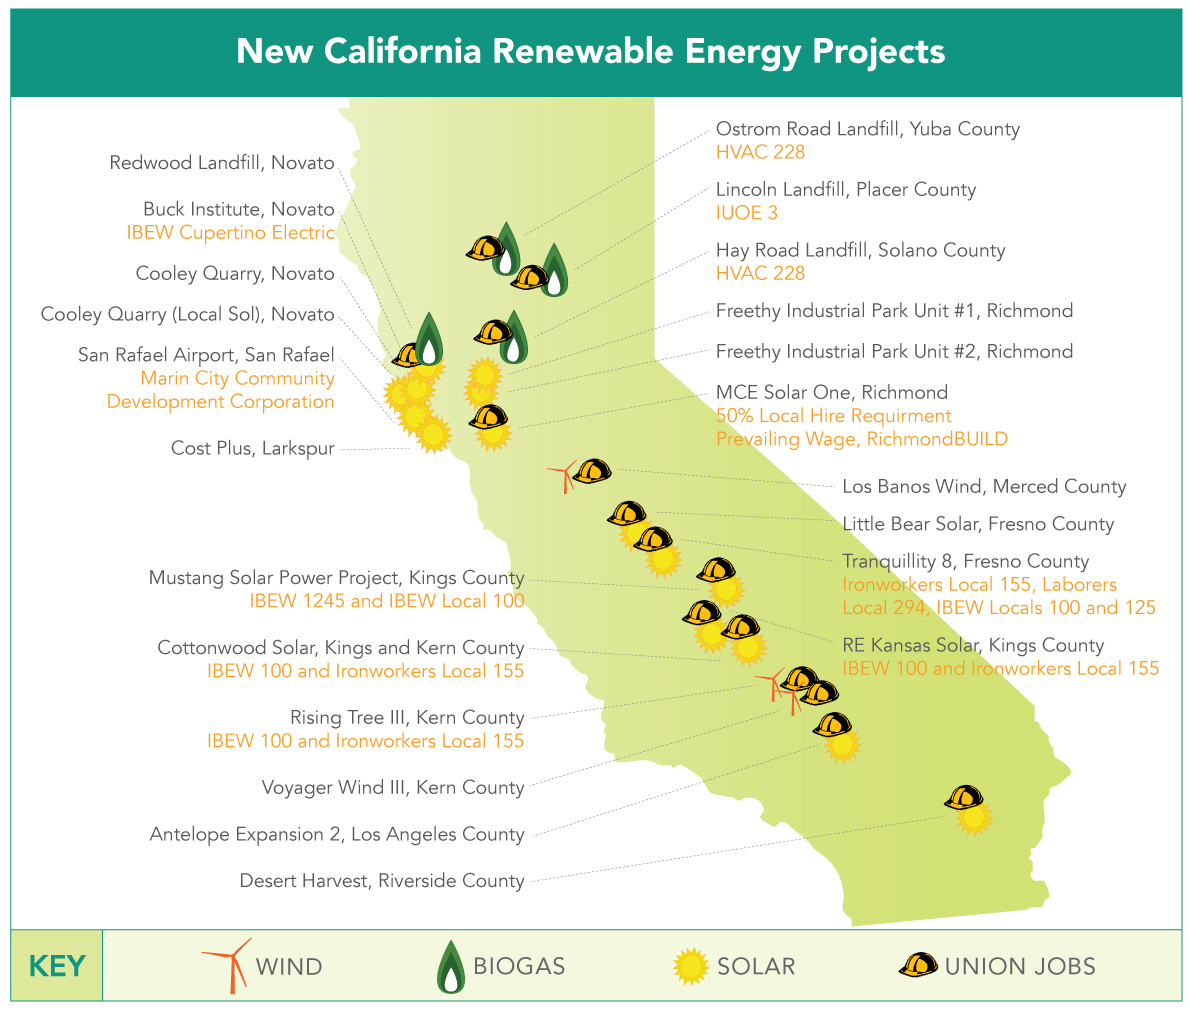 map shows MCE renewable energy projects in California, sun, wind turbine, biogas droplet and hard hat icons show locations